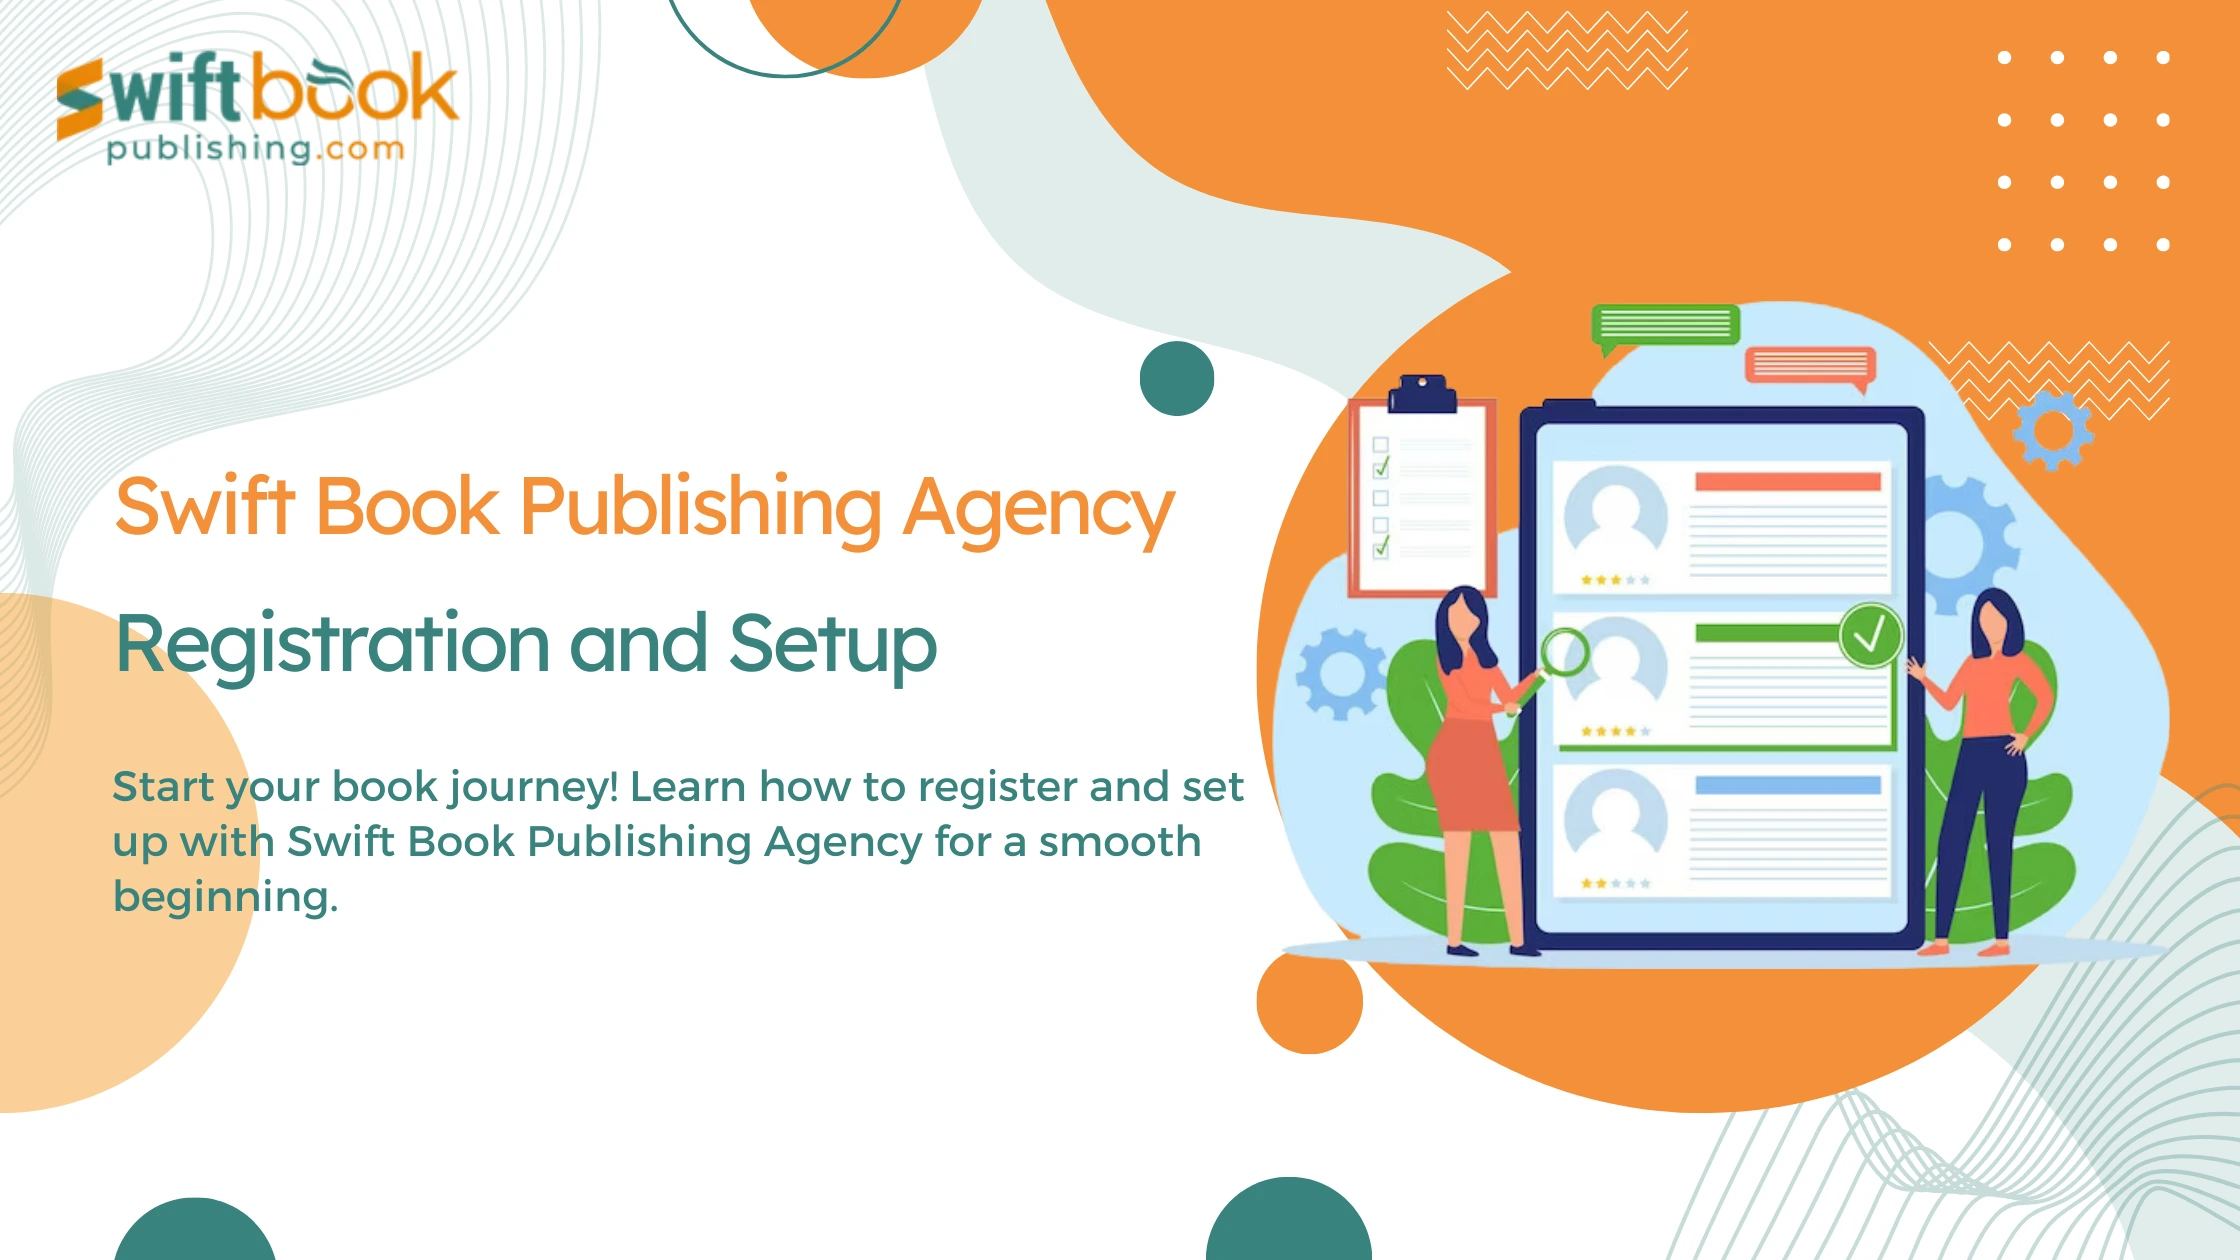 Getting Started with Swift Book Publishing Agency Registration and Setup